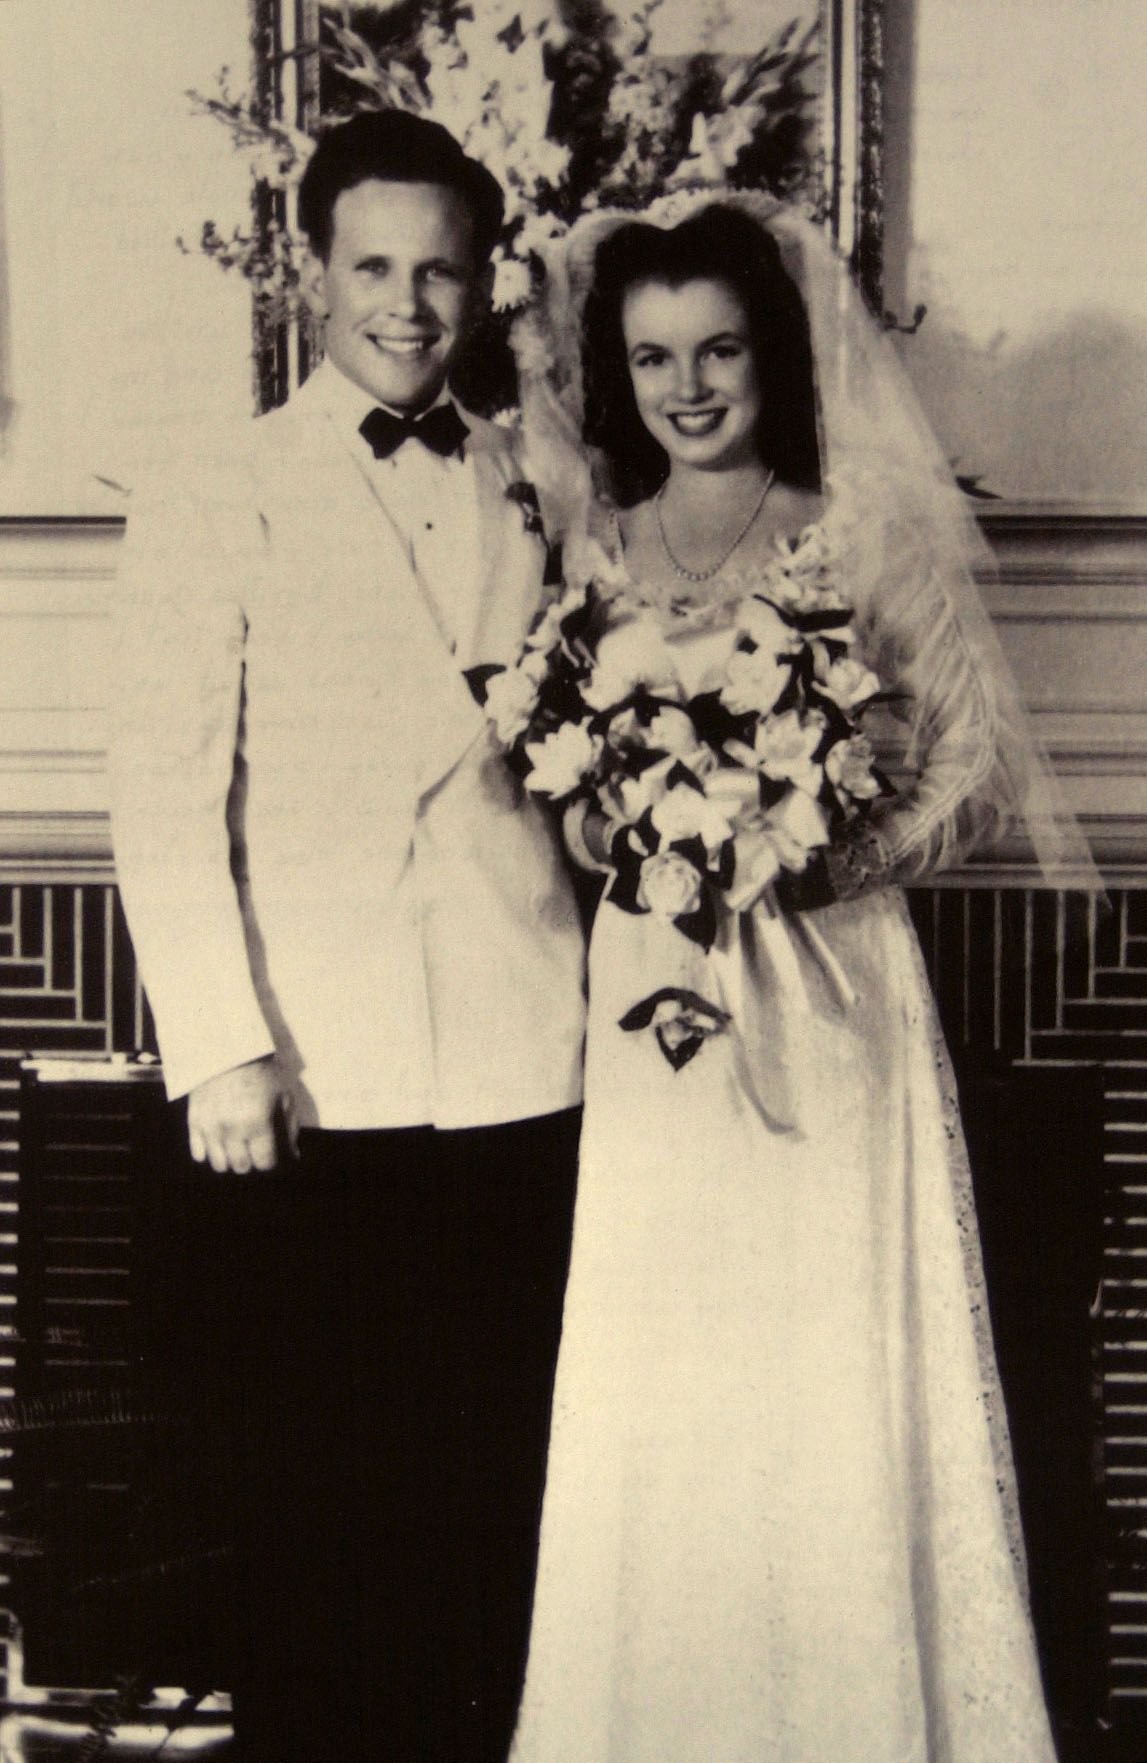 Jim Dougherty and the 16-year-old Norma Jean Baker on their wedding day in June of 1942 | Source: Getty Images